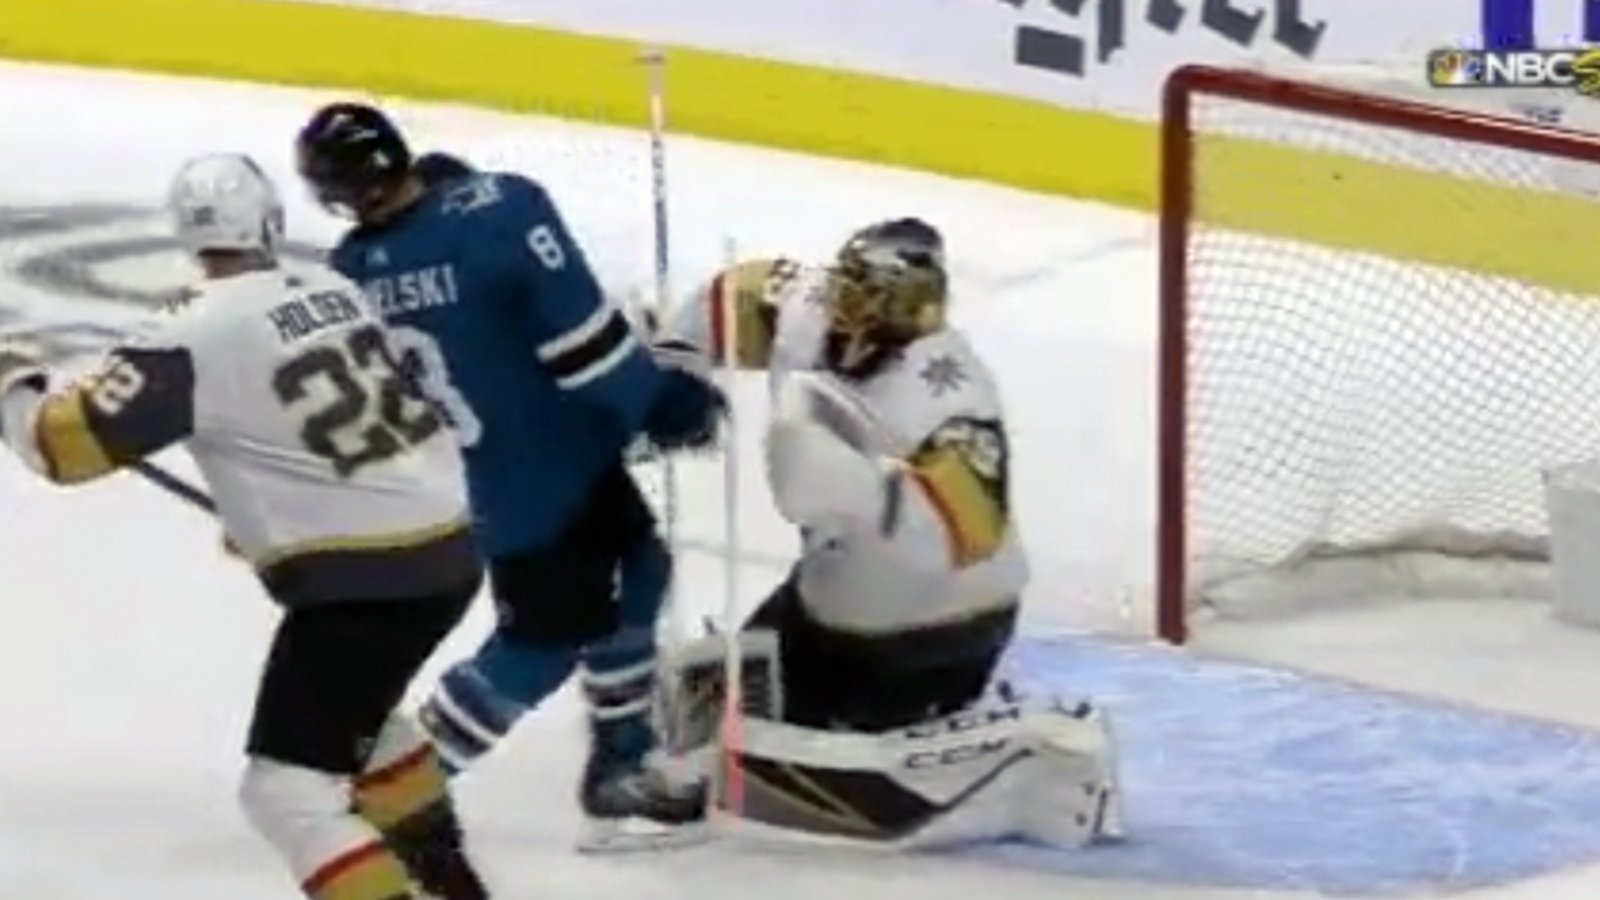 Pavelski scores series opener… with his face!